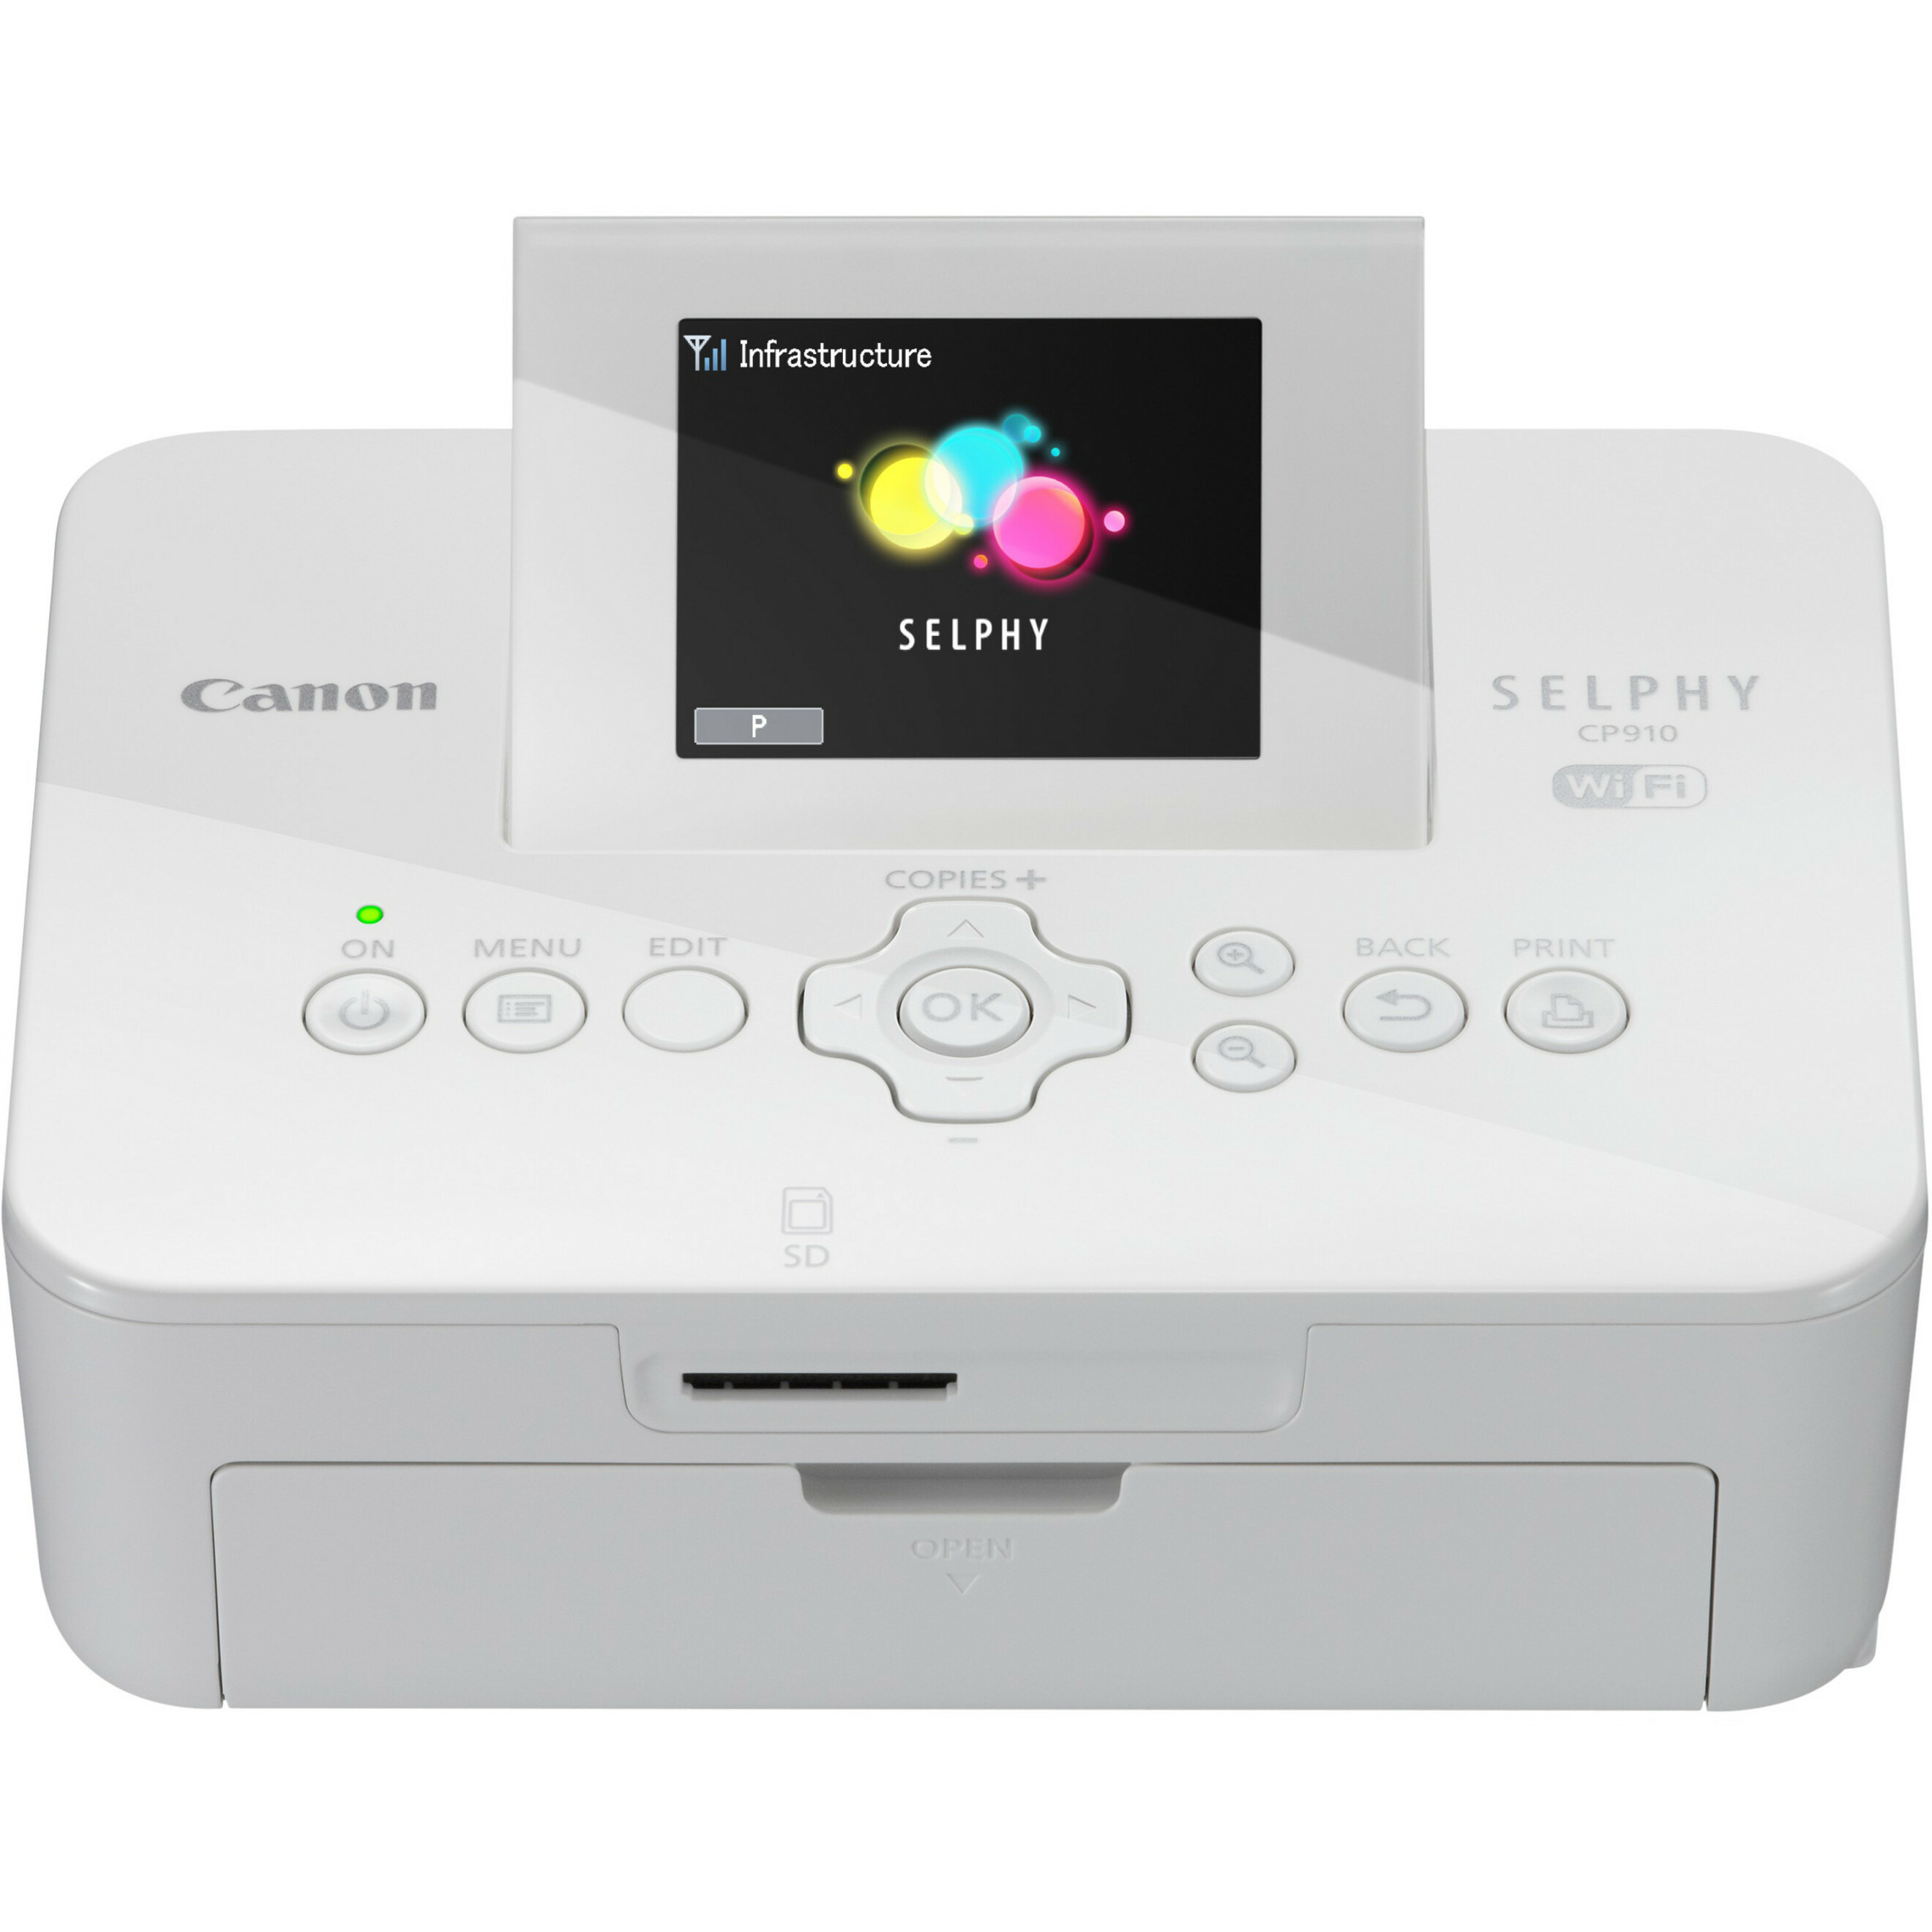 Canon SELPHY CP910 Dye Sublimation Printer, Color, Photo Print, Portable, 2.7" Display, White - image 2 of 2